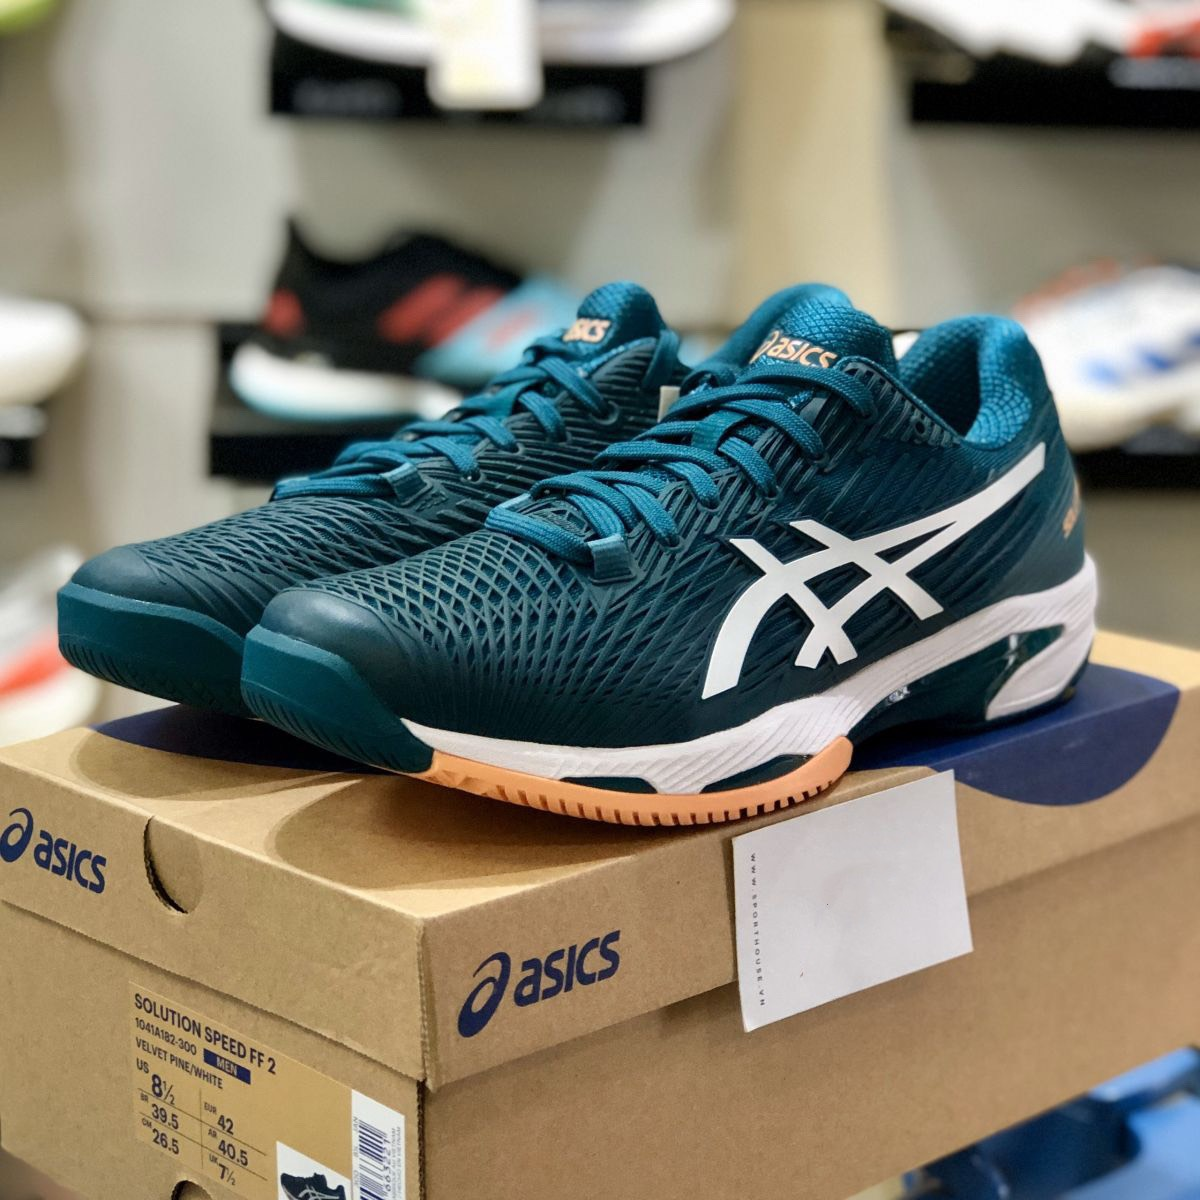 https://admin.thegioigiay.com/upload/product/2023/01/giay-tennis-asics-solution-speed-ff-2-2022-mau-xanh-63d78bf0d8614-30012023162048.png